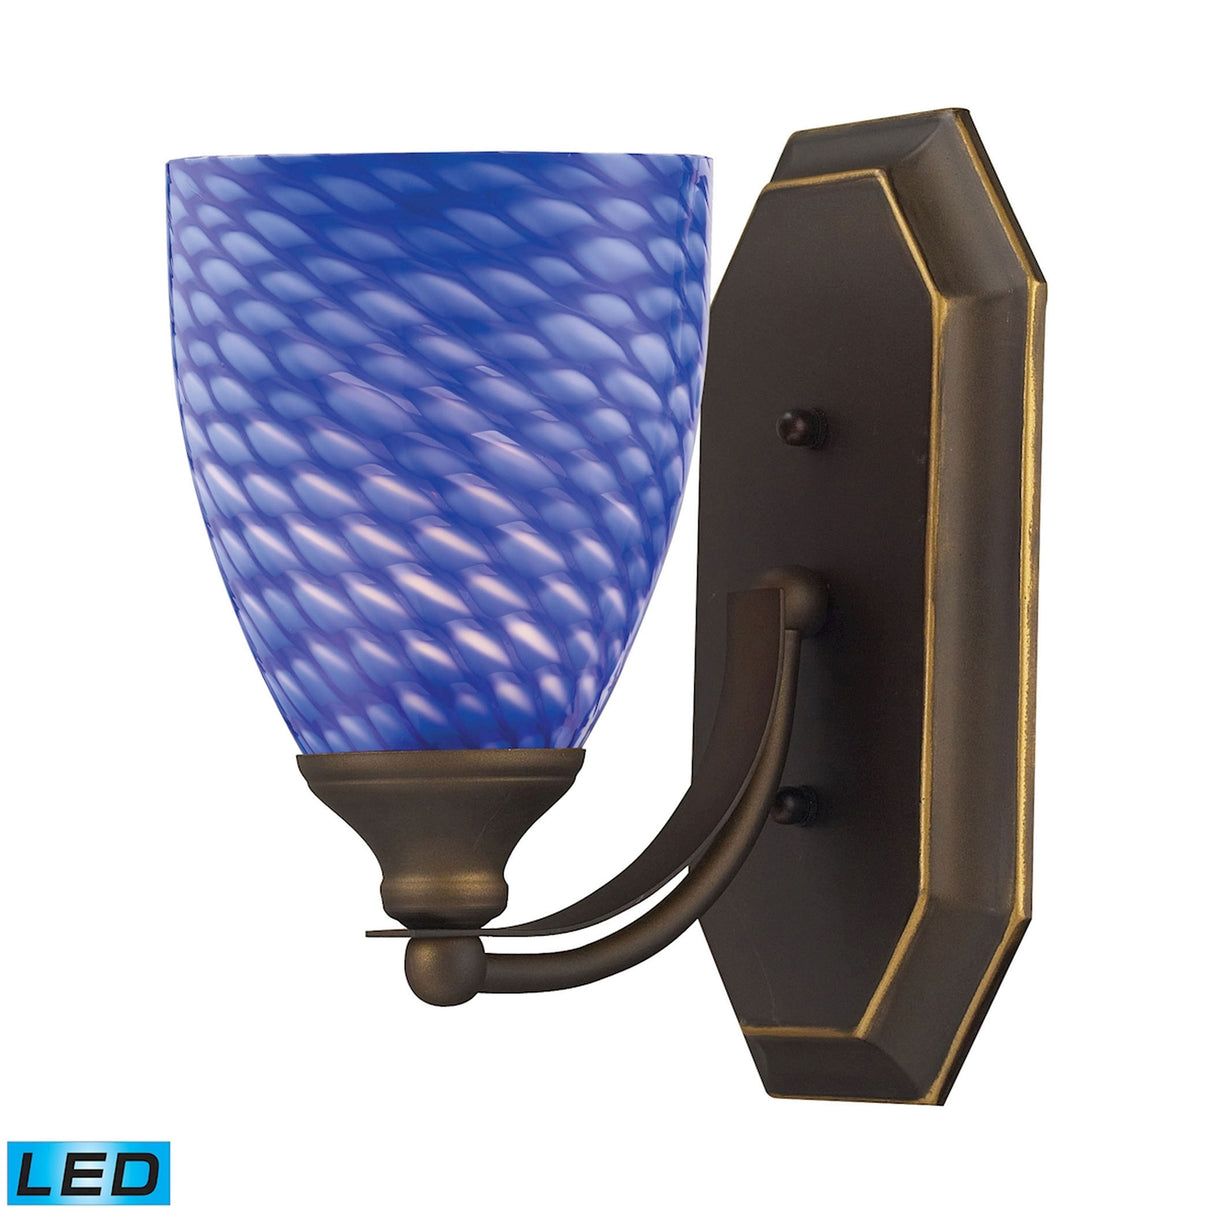 Elk 570-1B-S-LED Mix-N-Match Vanity 1-Light Wall Lamp in Aged Bronze with Sapphire Glass - Includes LED Bulb